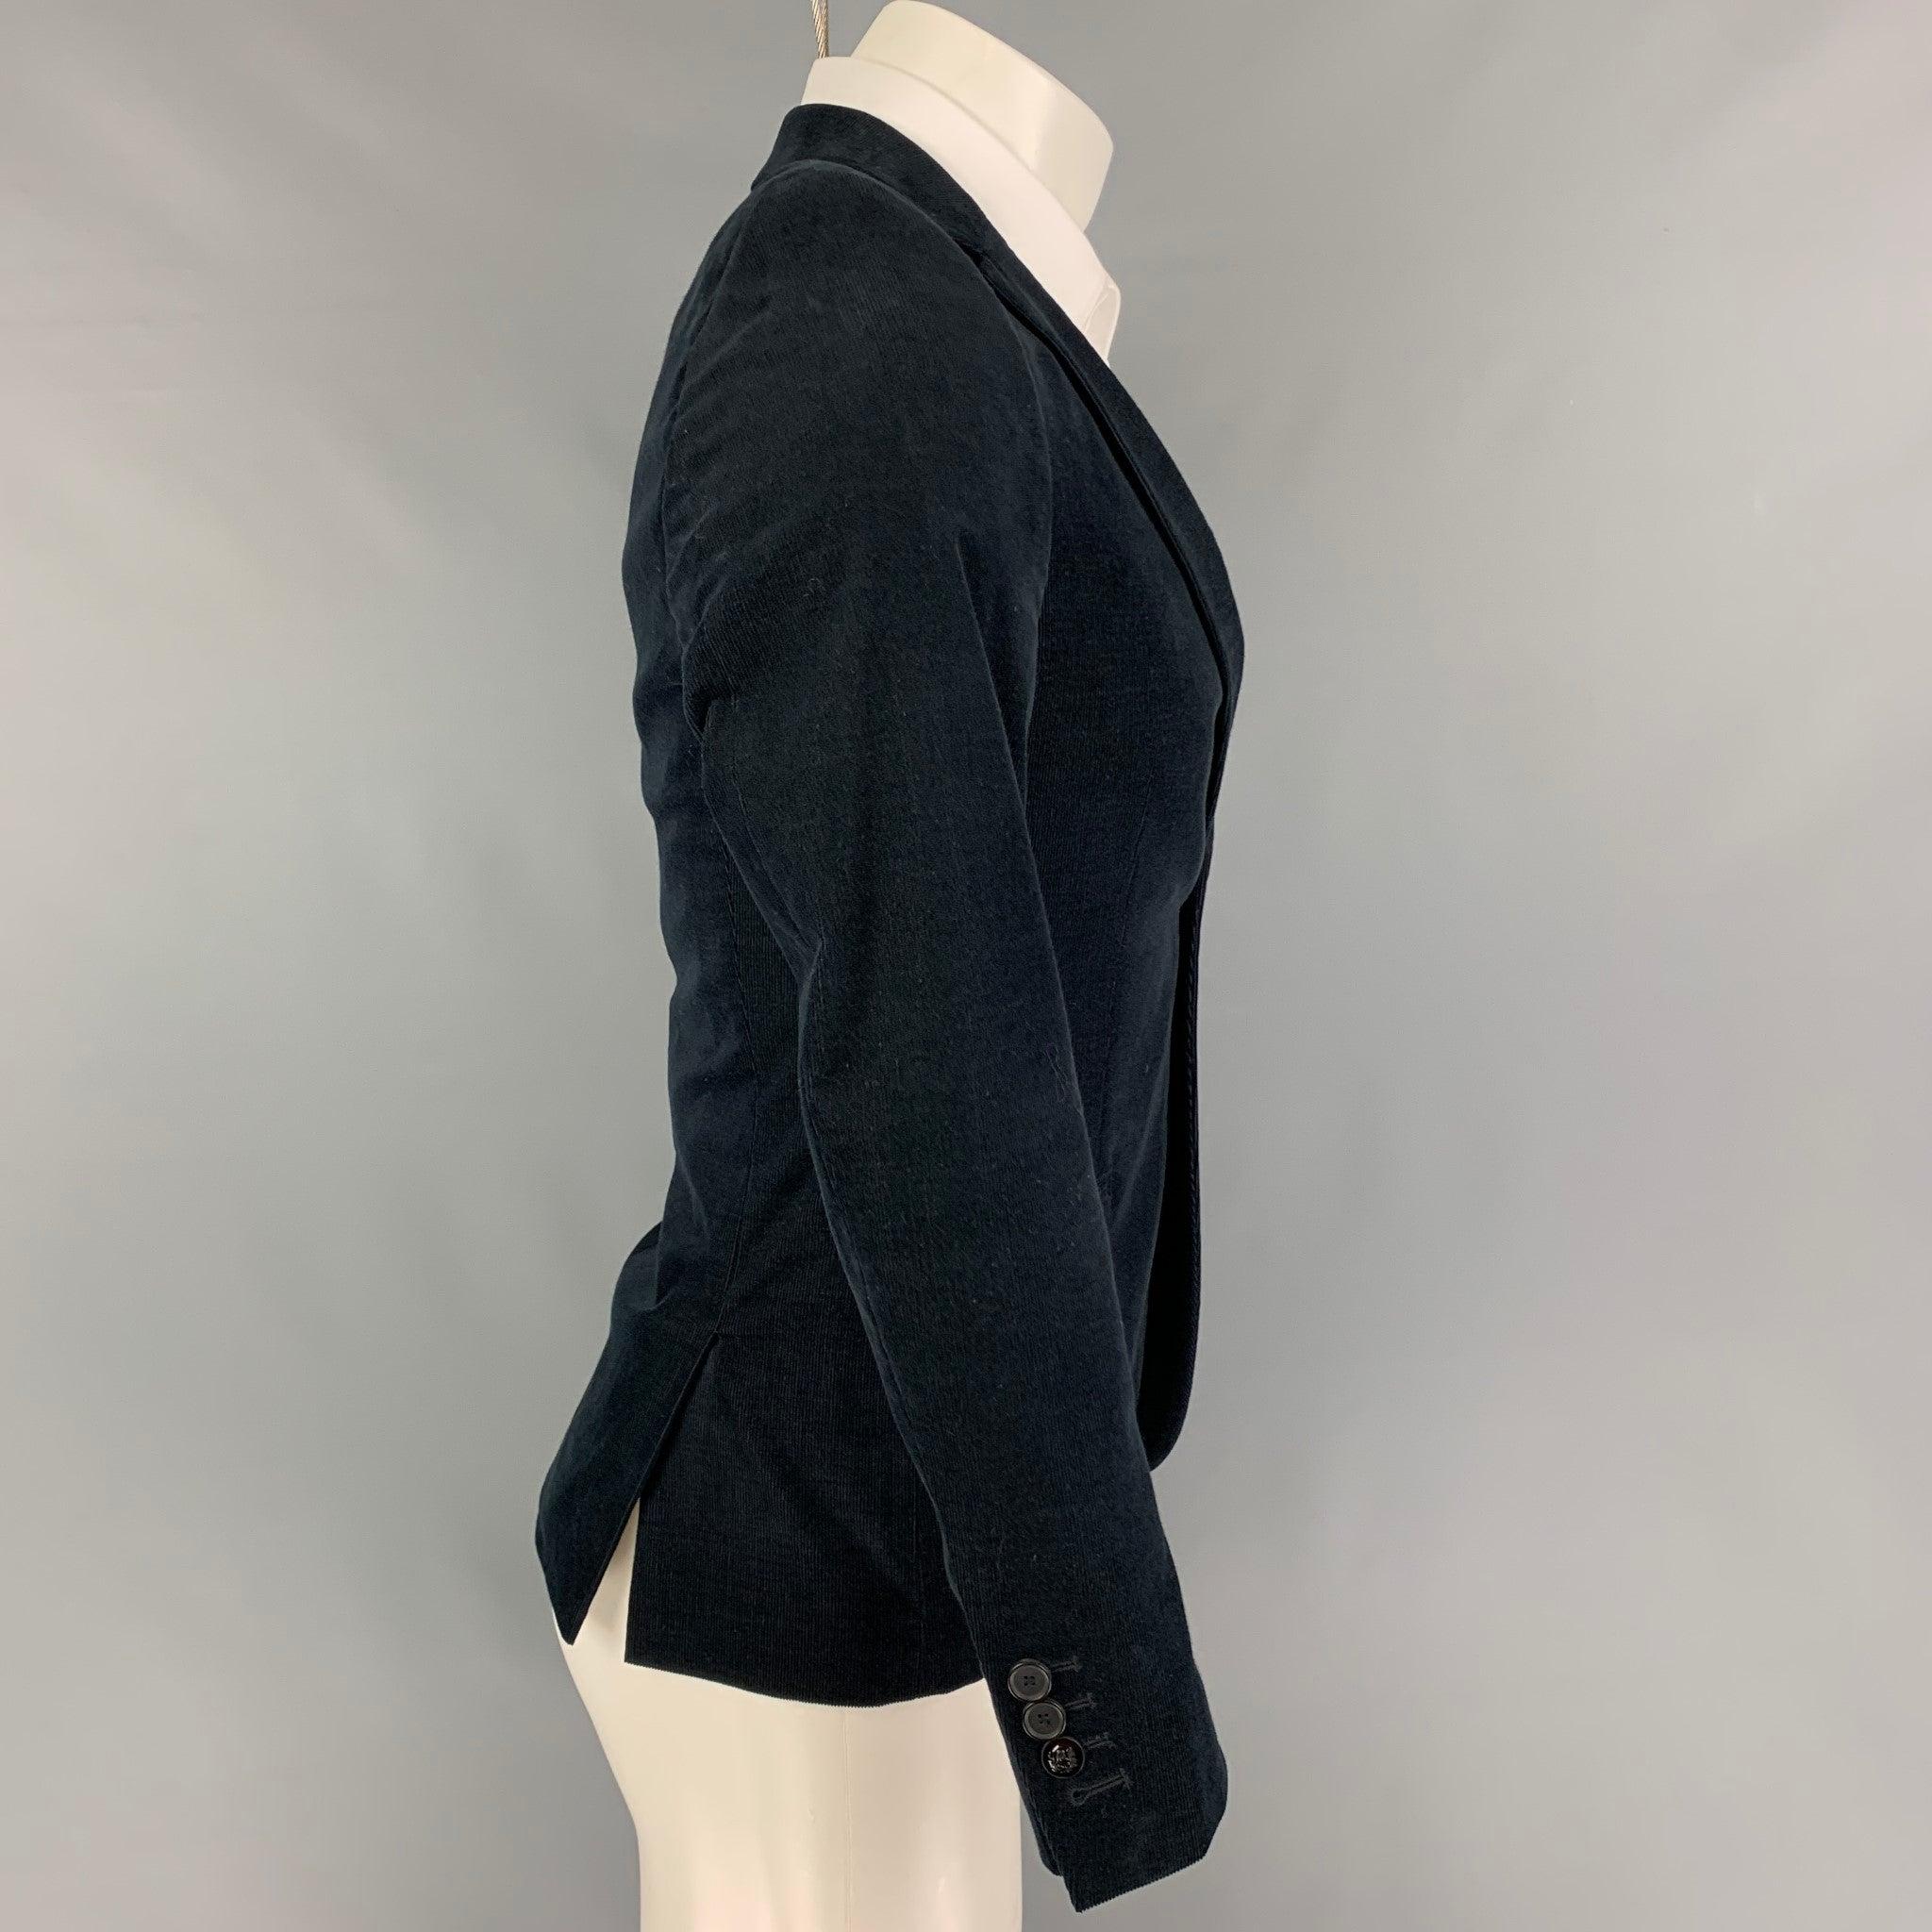 THE KOOPLES sport coat comes in a navy corduroy cotton with a full liner featuring a notch lapel, slit pockets, double back vent, and a double button closure.
Very Good
Pre-Owned Condition. 

Marked:   44 

Measurements: 
 
Shoulder: 16 inches 